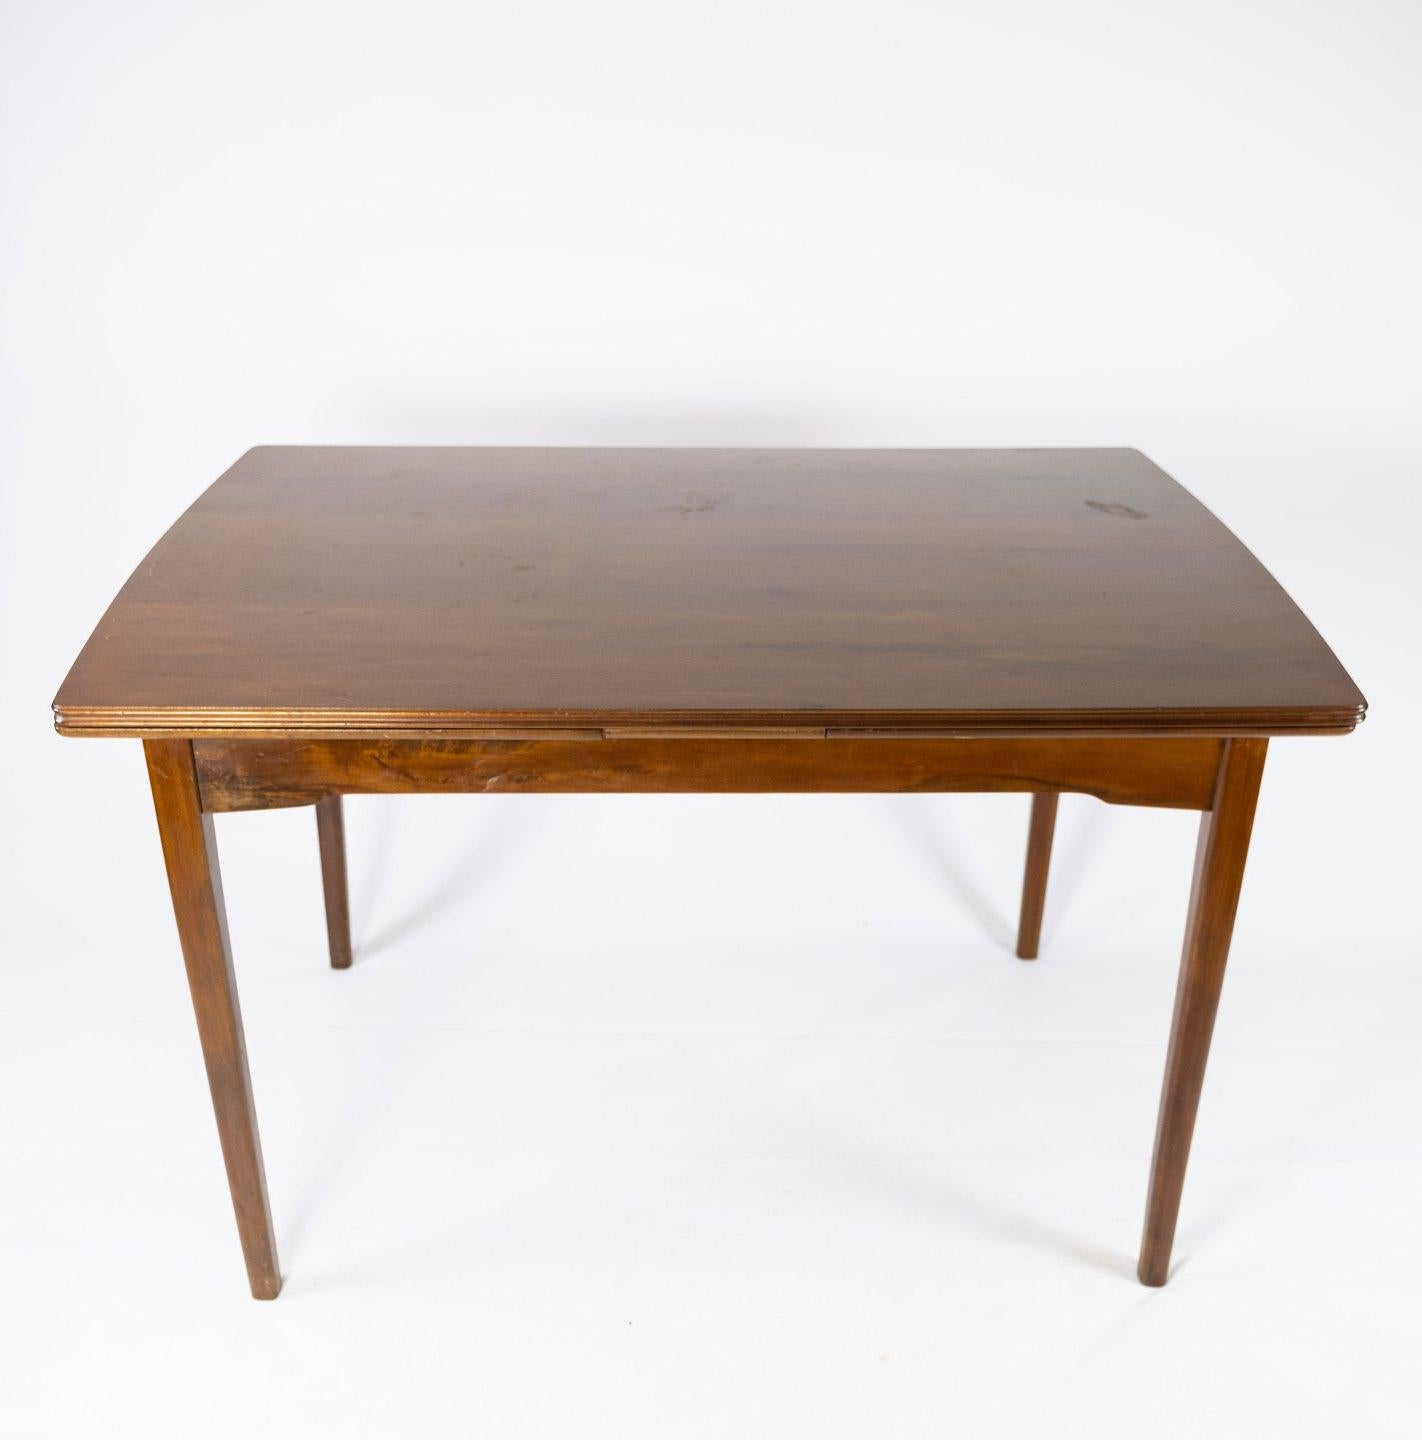 Mid-20th Century Dining Table in Walnut with Extension of Danish Design from the 1960s